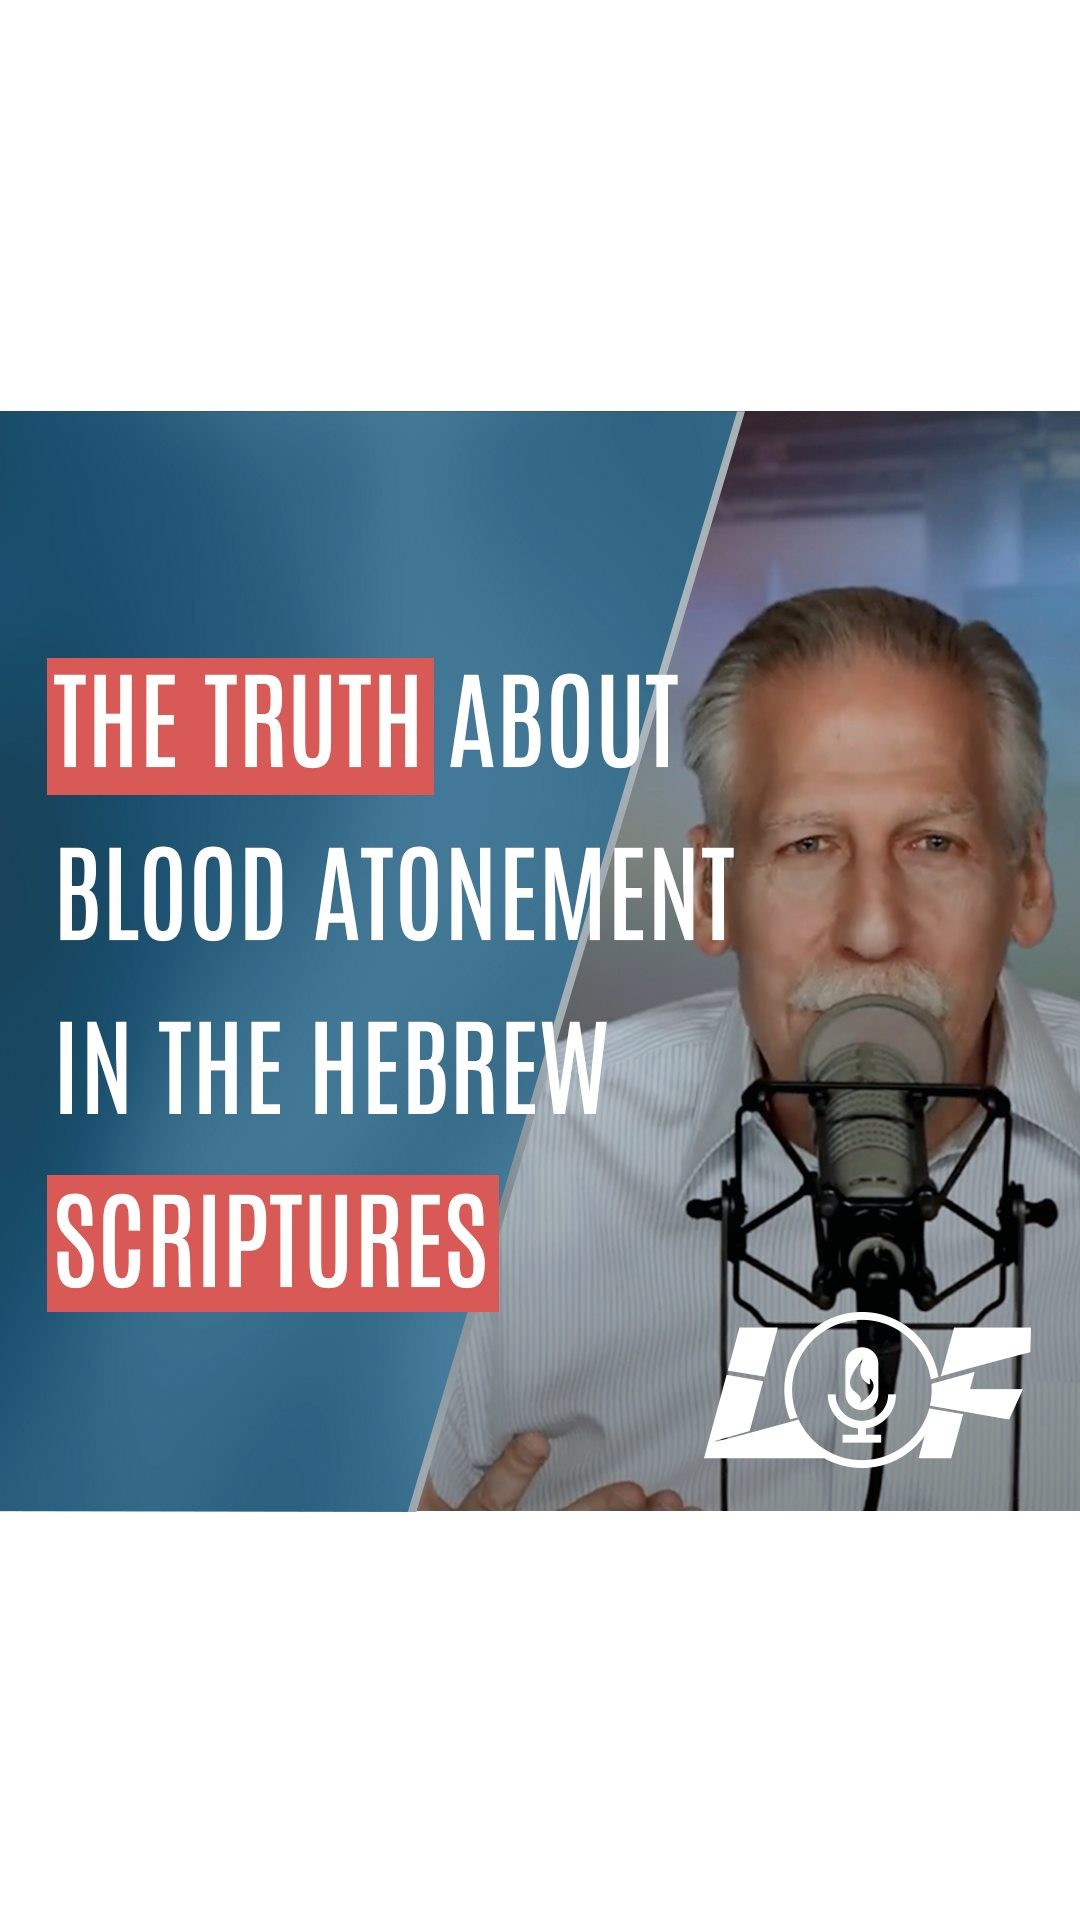 The Truth About Blood Atonement in the Hebrew Scriptures
Is atonement possible without the shedding of blood? Did Solomon and the prophets provide instructions for how to be forgiven of sins once there was no temple and no sacrifices? Dr. Brown takes up these questions and more in the latest video in the Answering the Rabbis series, The Truth About Blood Atonement in the Hebrew Scriptures. LINK FOR FULL VIDEO IN BIO
#askdrbrown #drmichaelbrown #newvideo #watchnow #YouTube #channel #watching #political